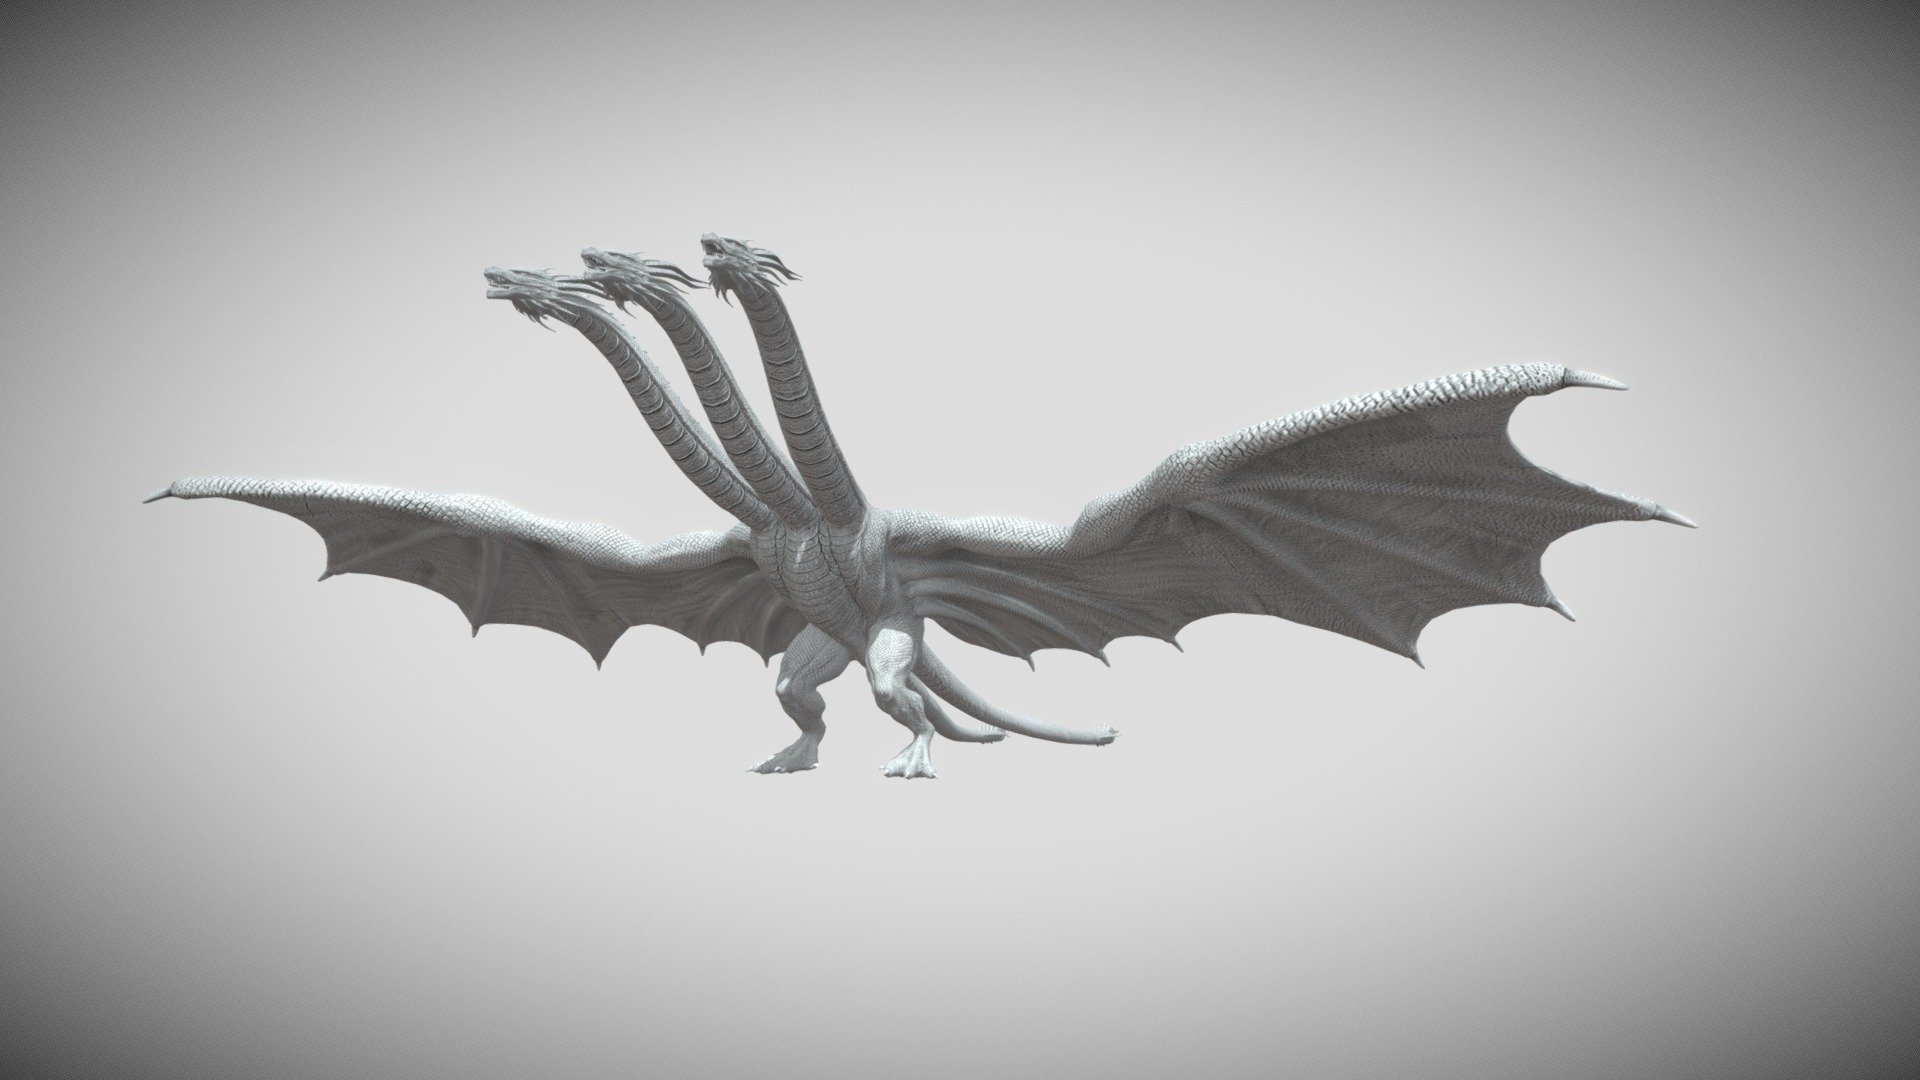 Ghidorah model i did in Blender.

with 4k Textures

the blendfile has shape keys for the wing movement
and it is rigged in blender.

Hope you like it! - Ghidorah - 3D model by erictiedt 3d model